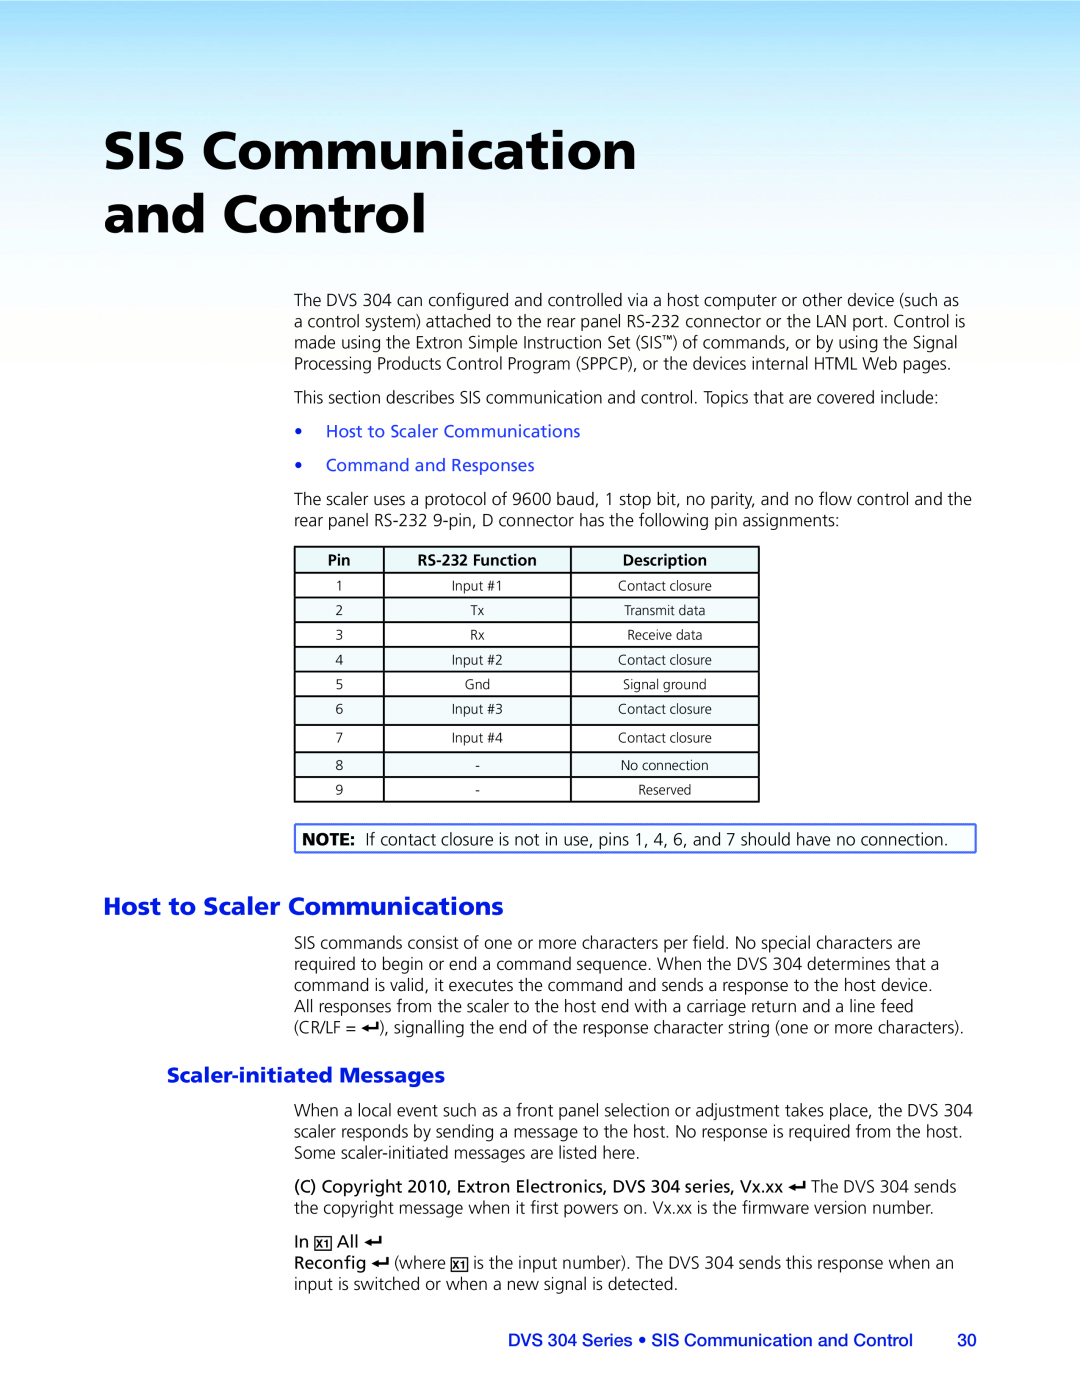 Extron electronic DVS 304 manual SIS Communication and Control, Host to Scaler Communications, Scaler-initiatedMessages 